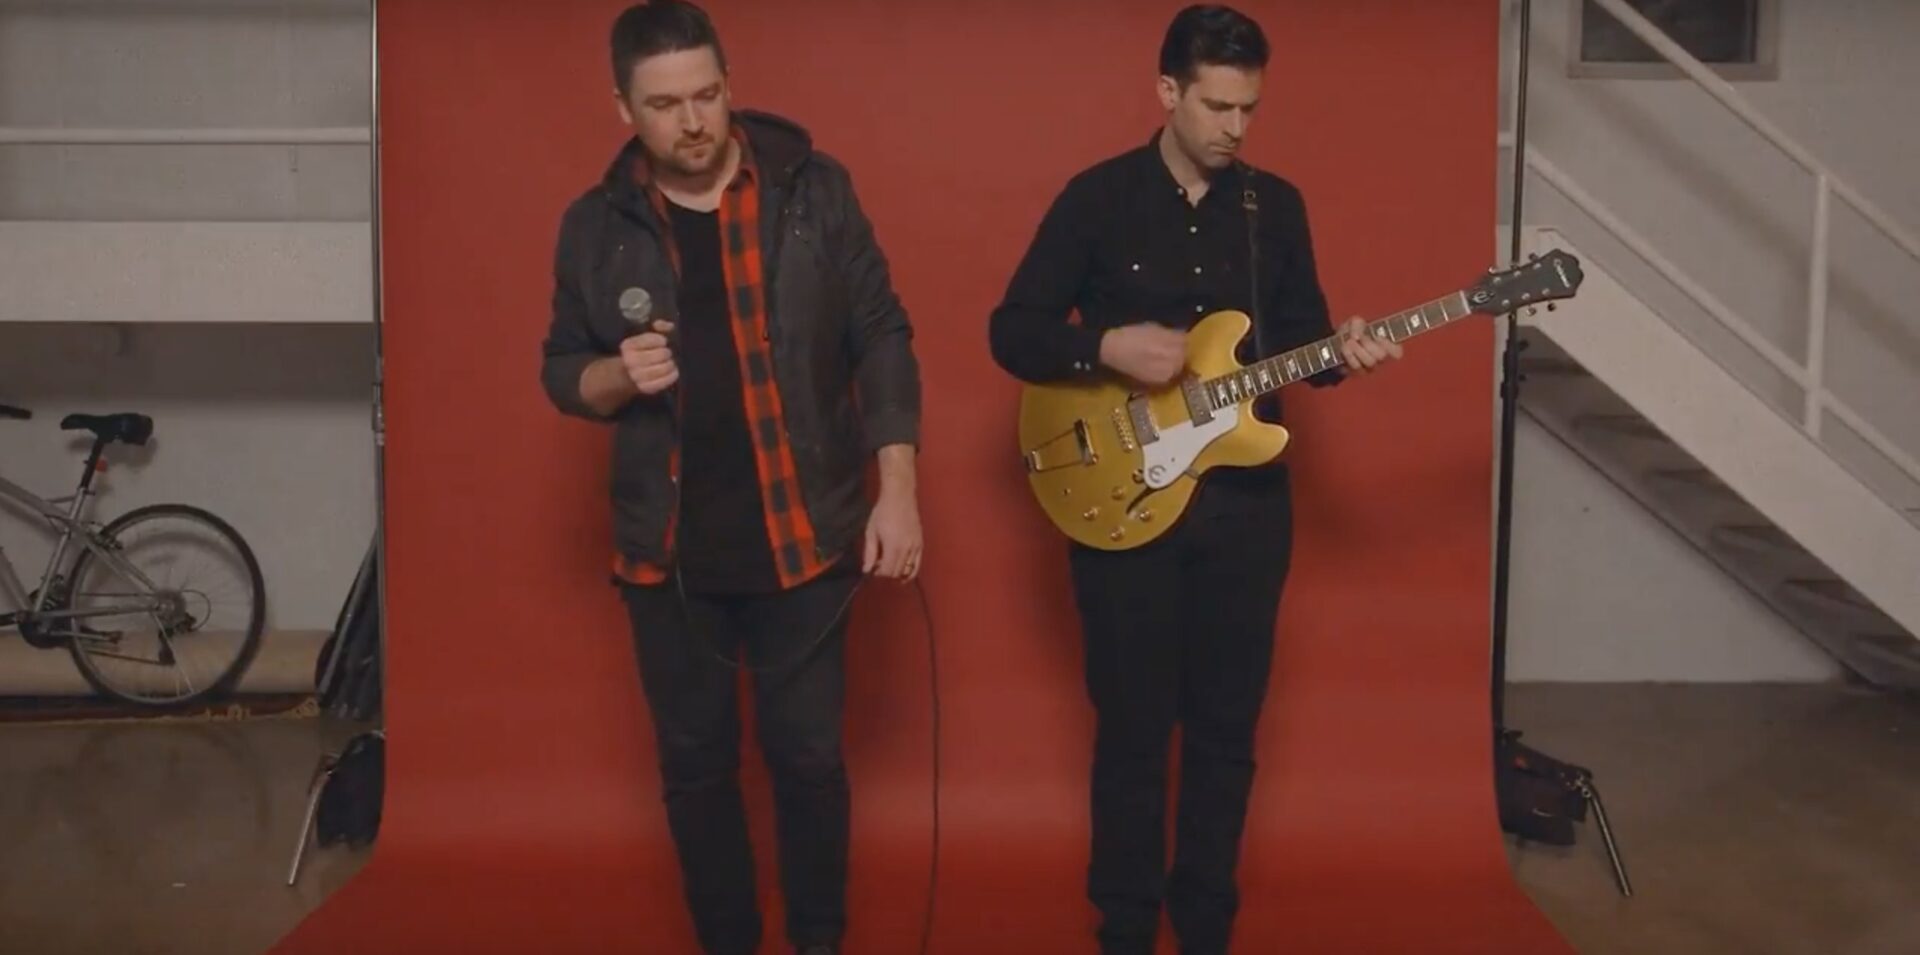 Daniel Ellsworth + The Great Lakes use color to tell a story with “Running” video